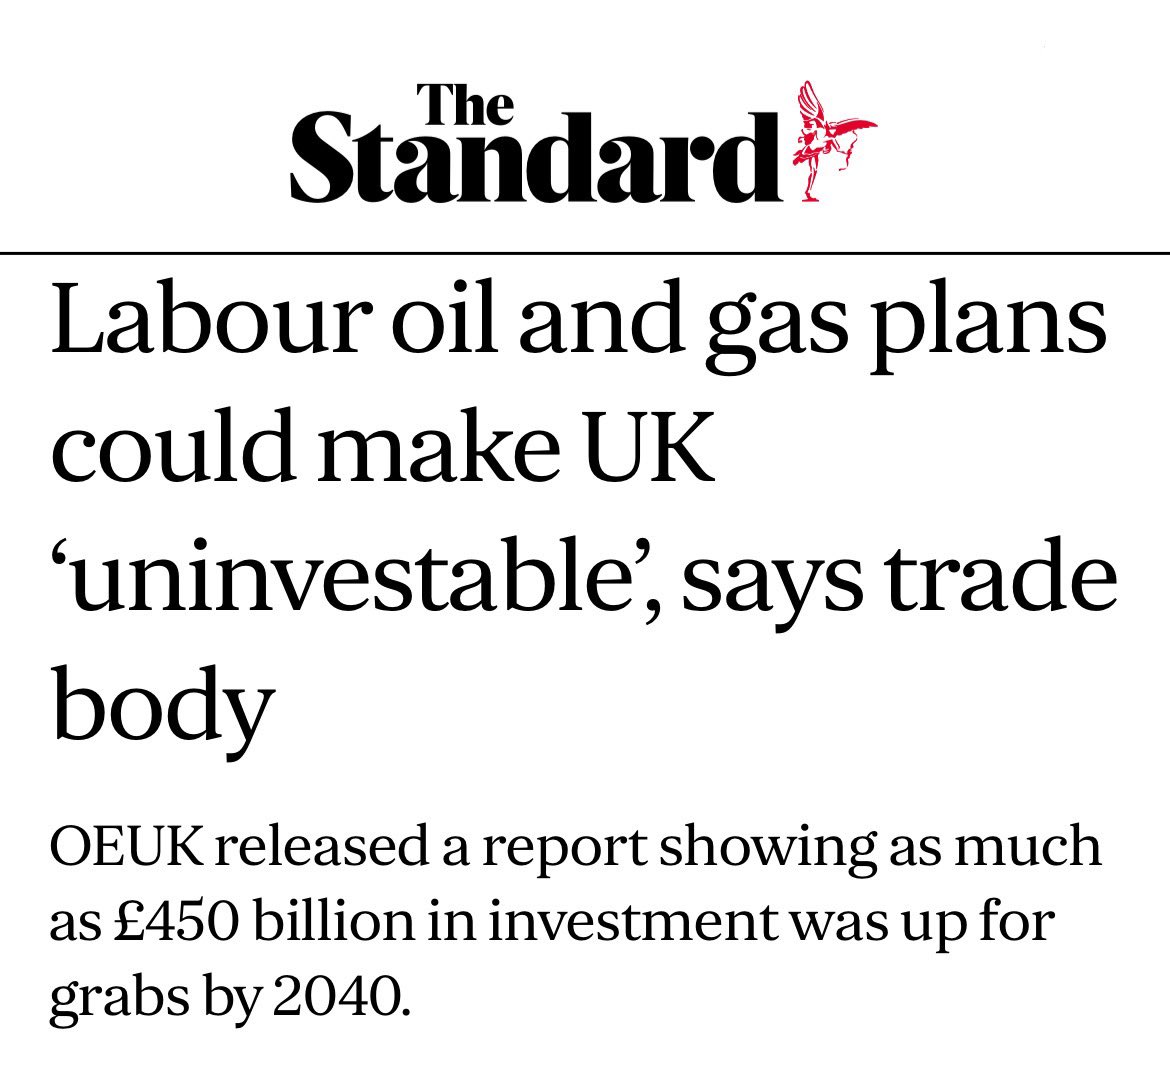 For all their talk about attracting investment, Rachel and Ed’s plans are a drop in the ocean compared to the BILLIONS they will deter. That’s why industry has warned that Labour’s plans would make Britain 'uninvestable' and the unions say they're 'reckless in the extreme'.